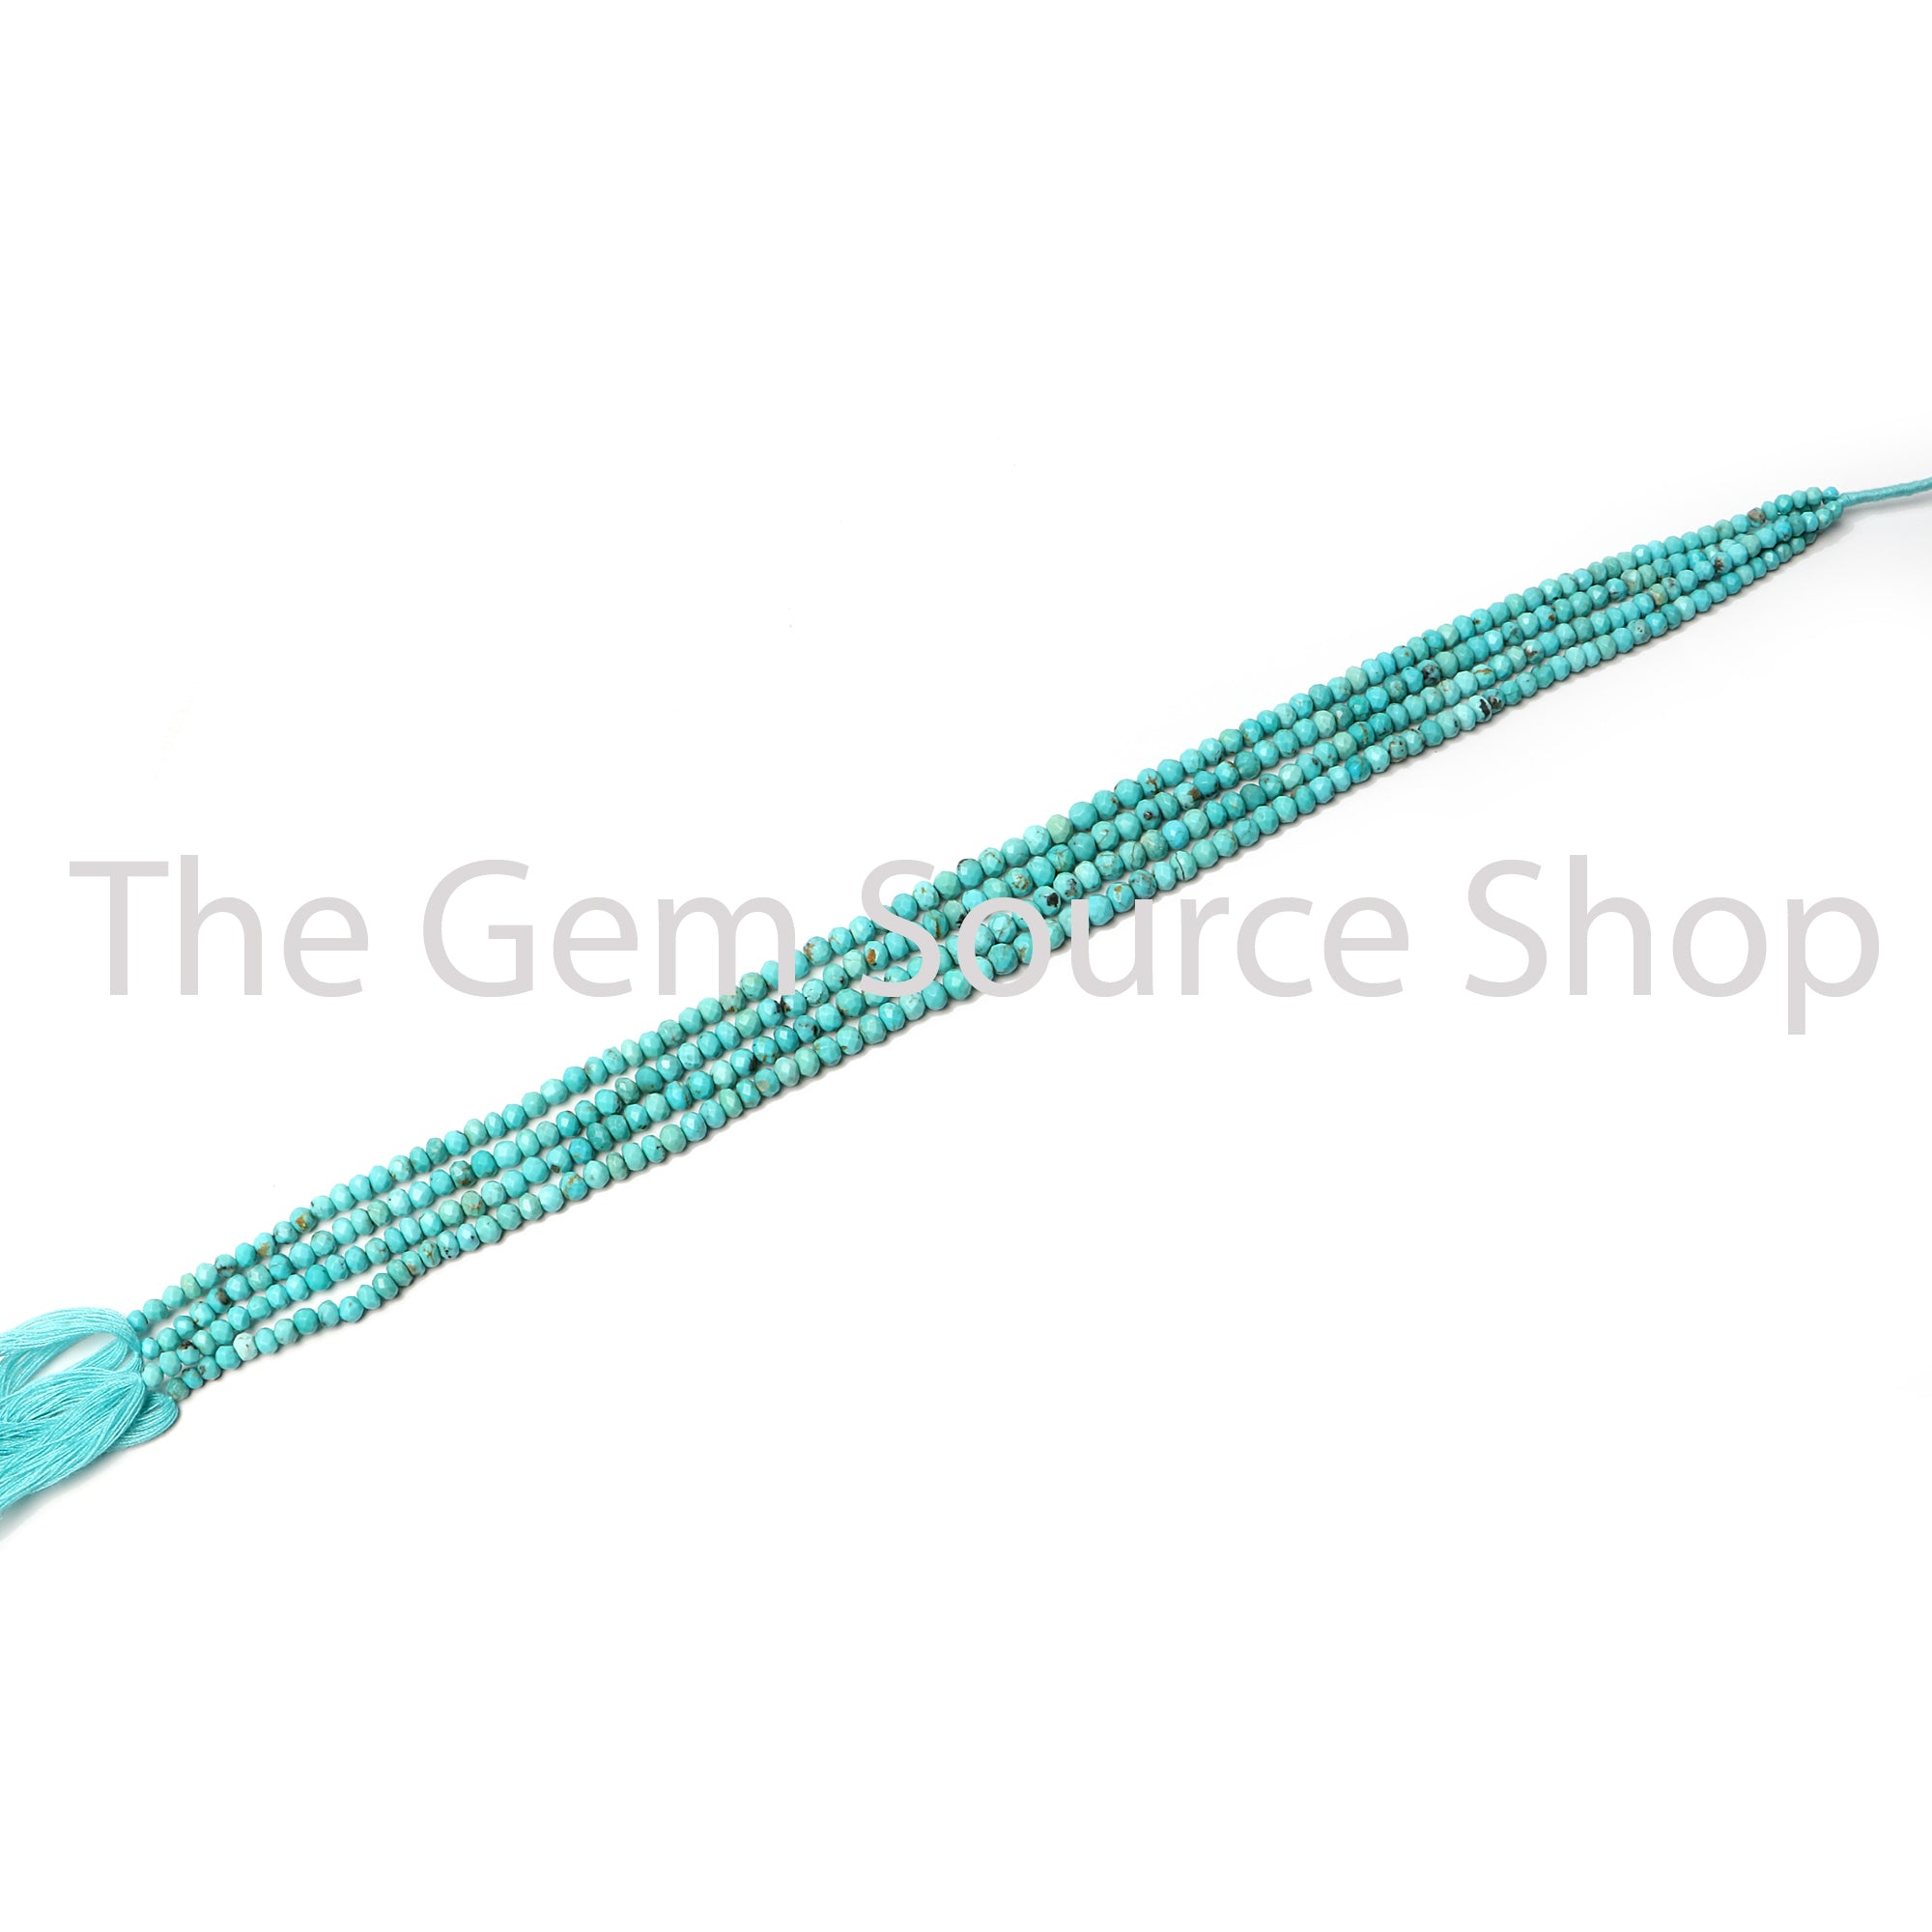 Turquoise Faceted Rondelle Shape Gemstone Beads TGS-2216